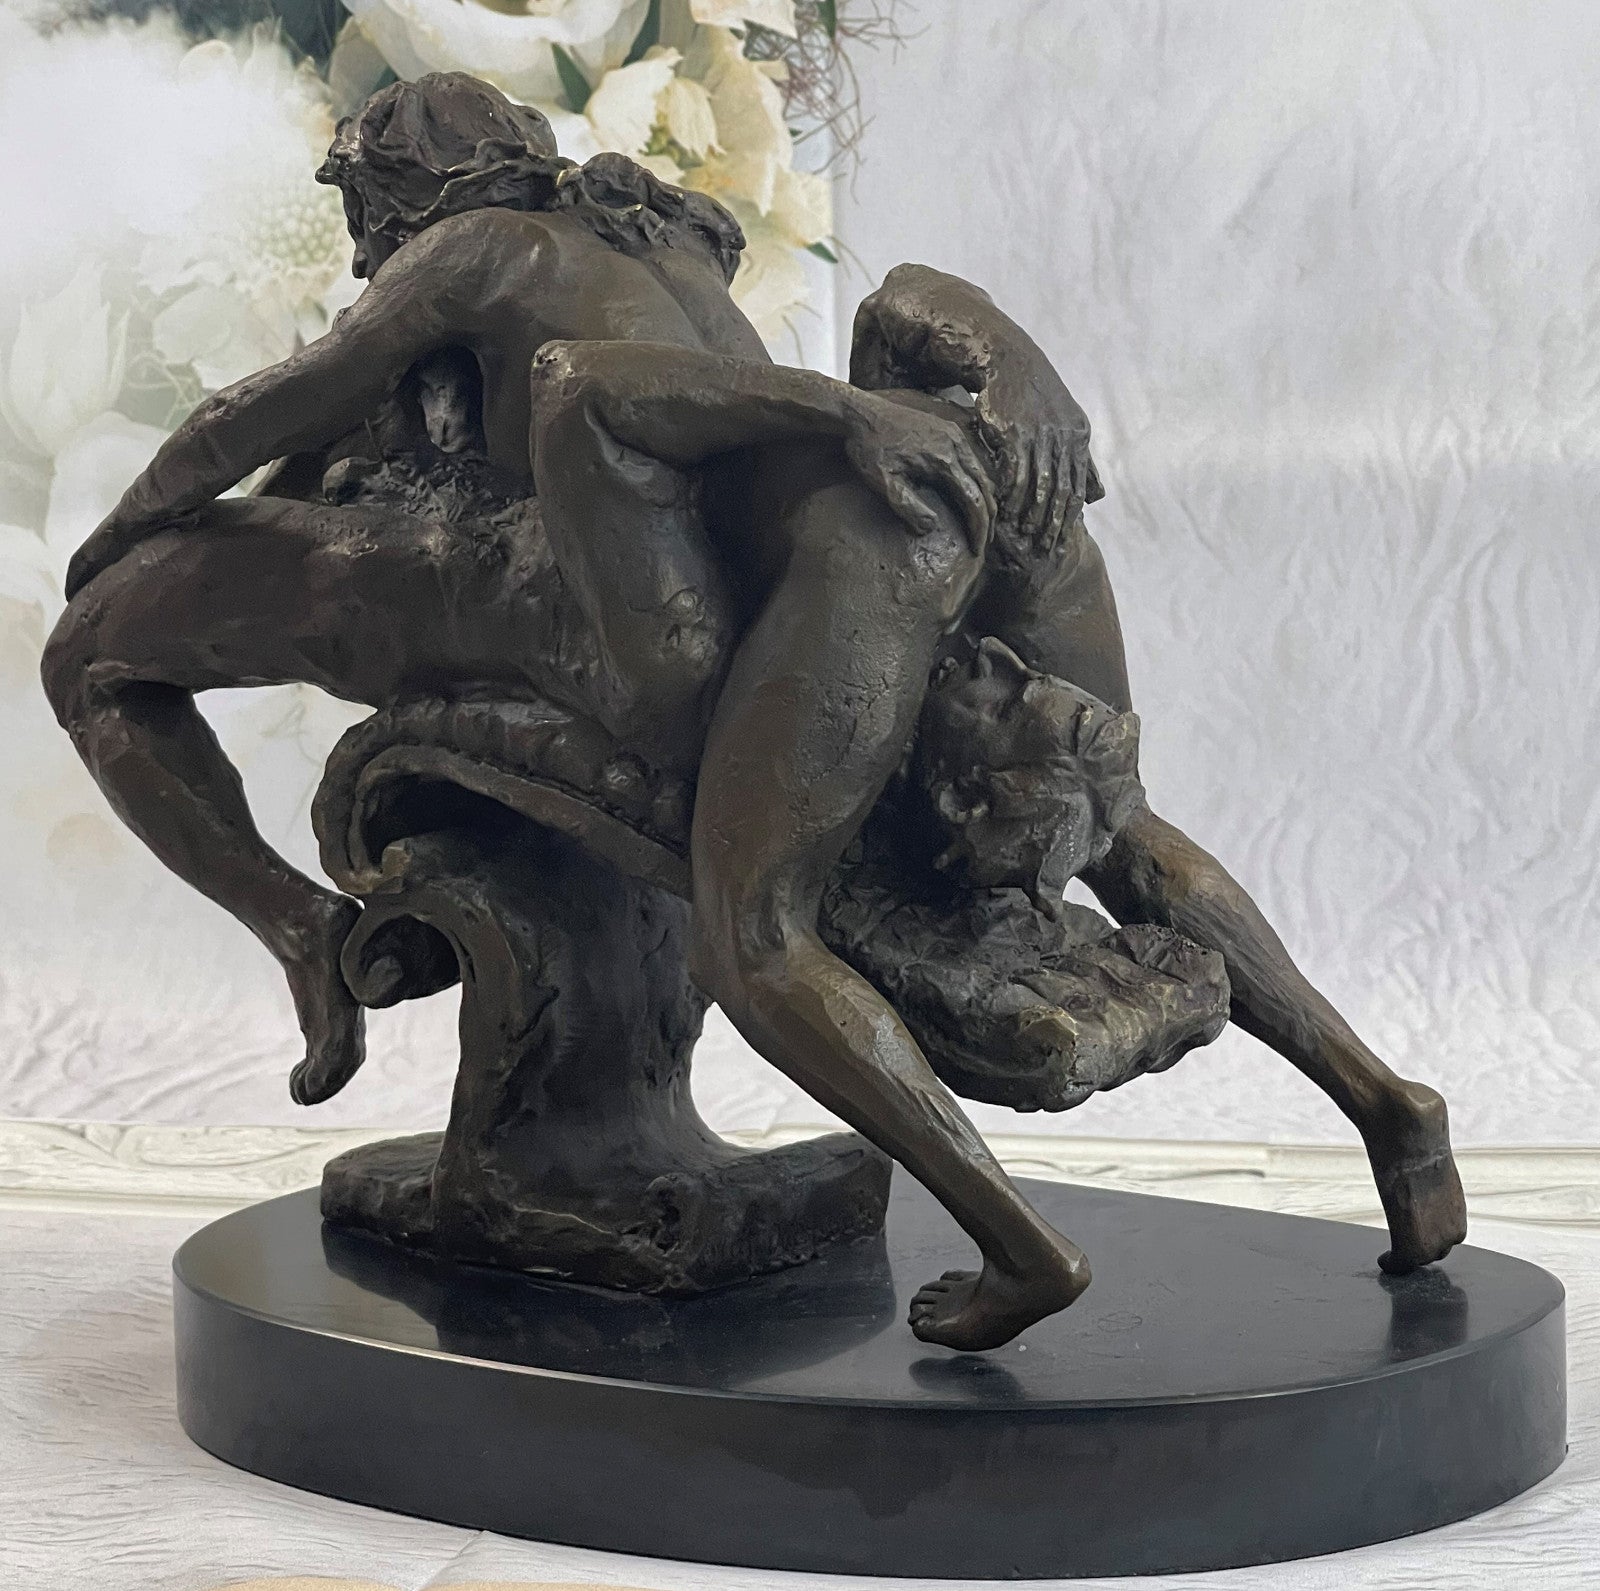 Handcrafted bronze sculpture SALE Fe Laying Naked Nude Odegaard Original Signed